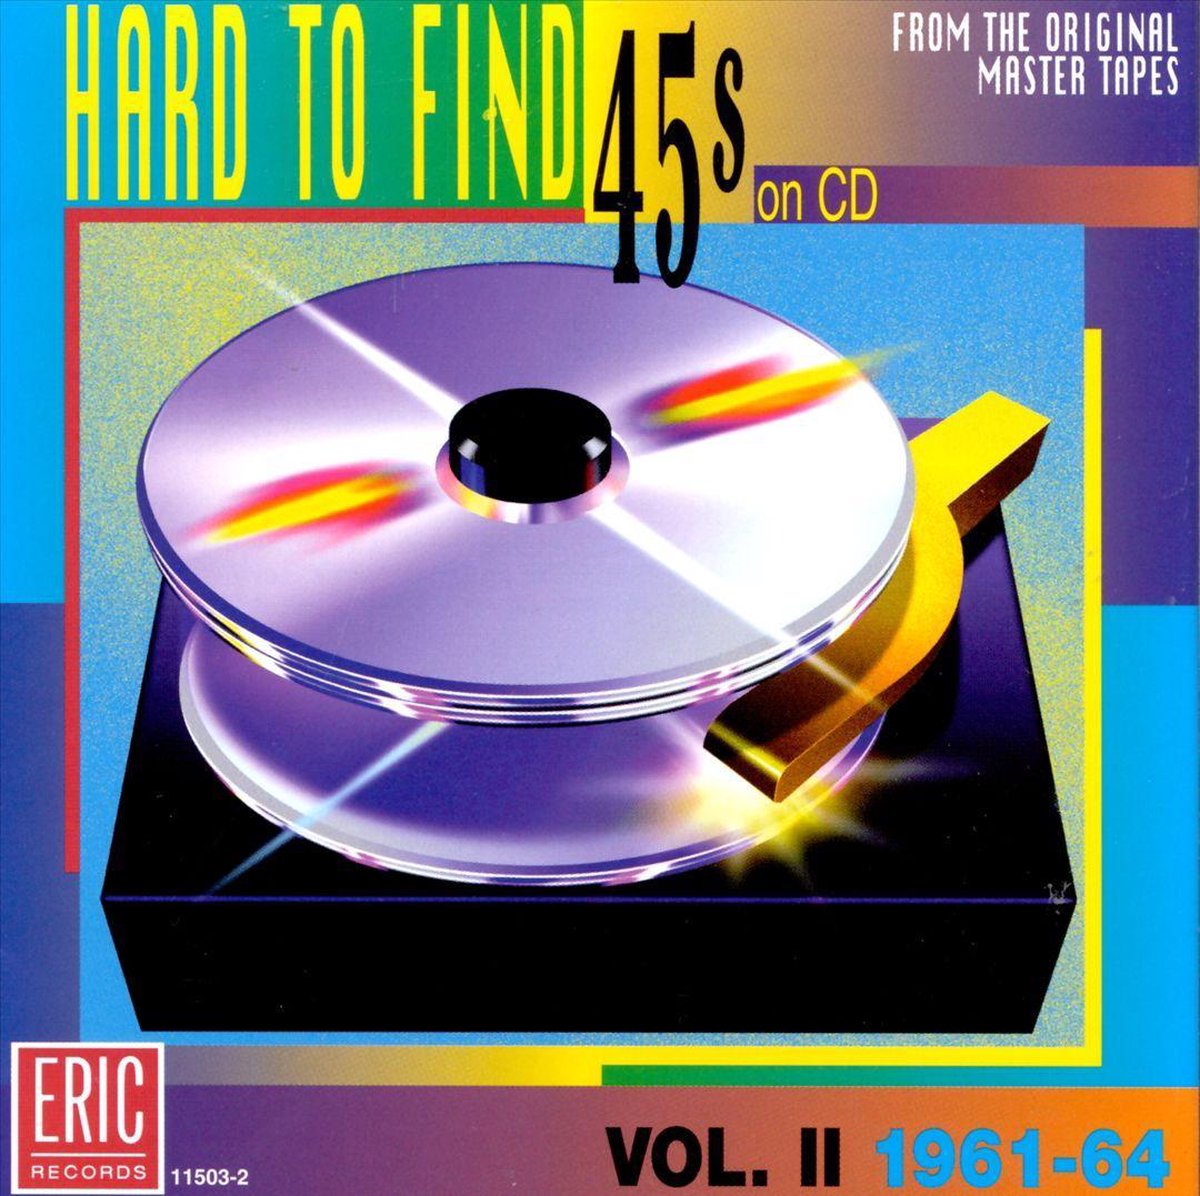 Hard To Find 45s On CD Vol. 2: 1961-64 - various artists